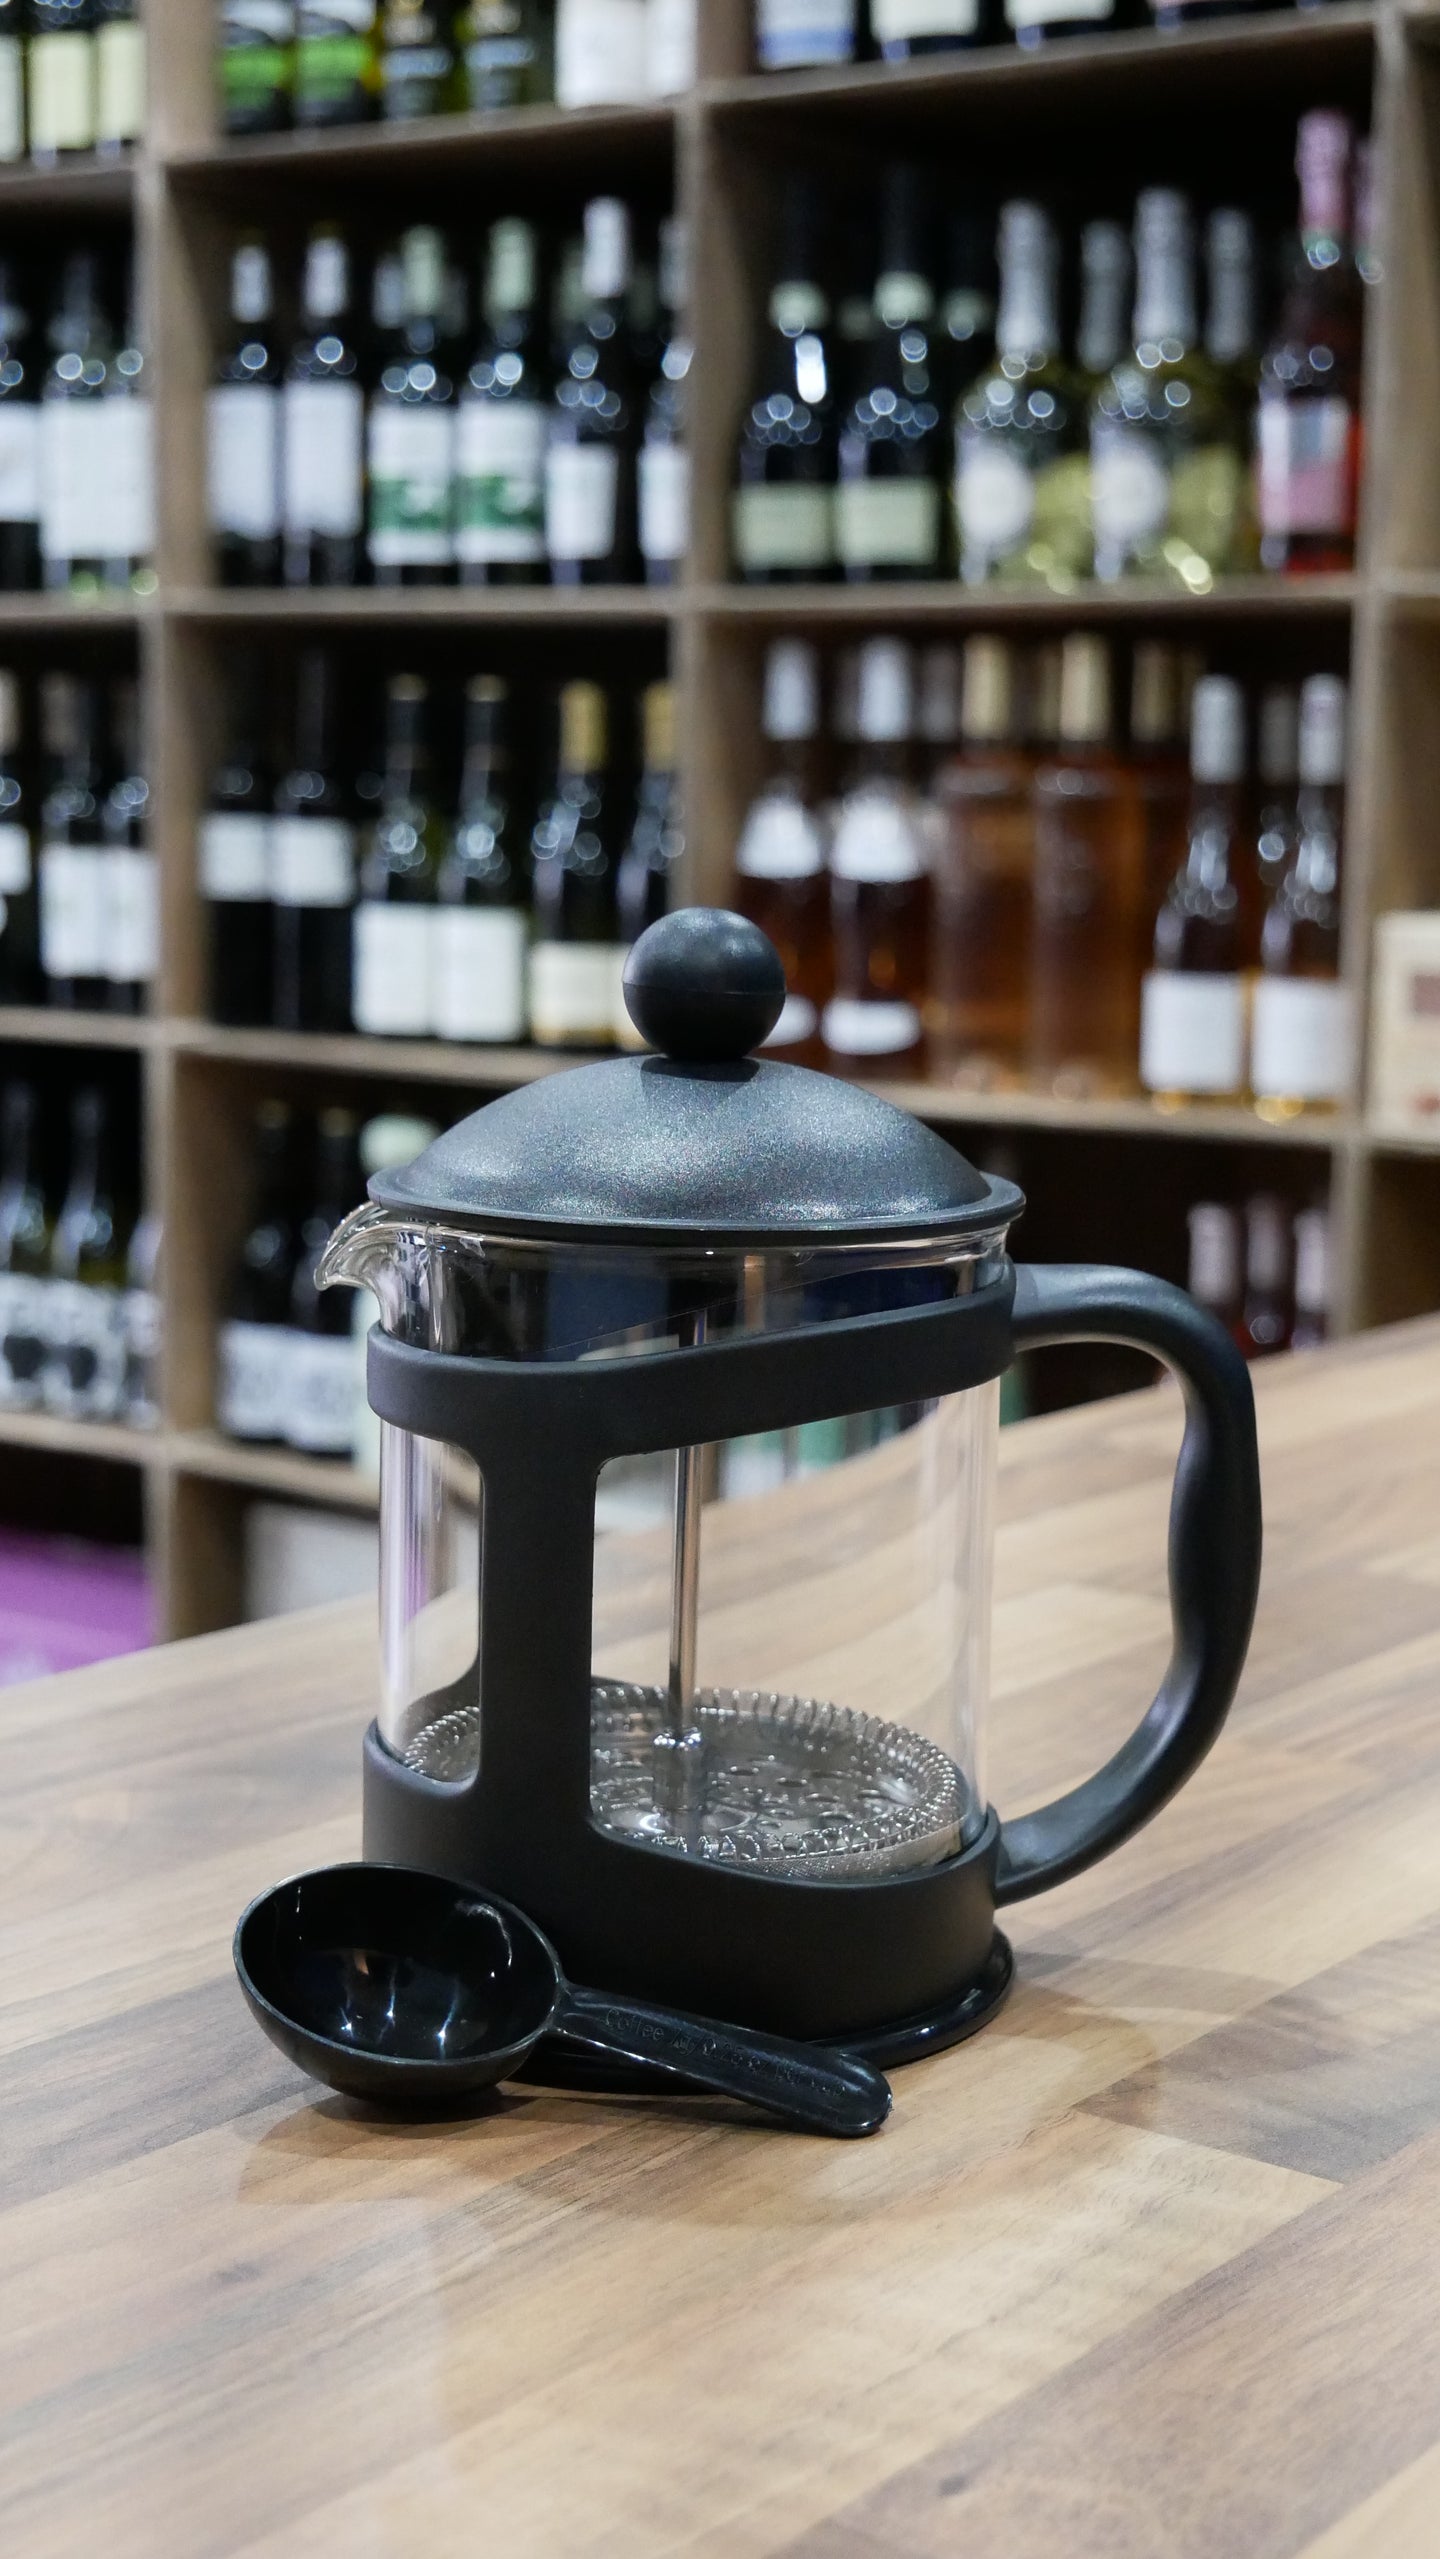 Cafetiere - 3 cup size / 350ml